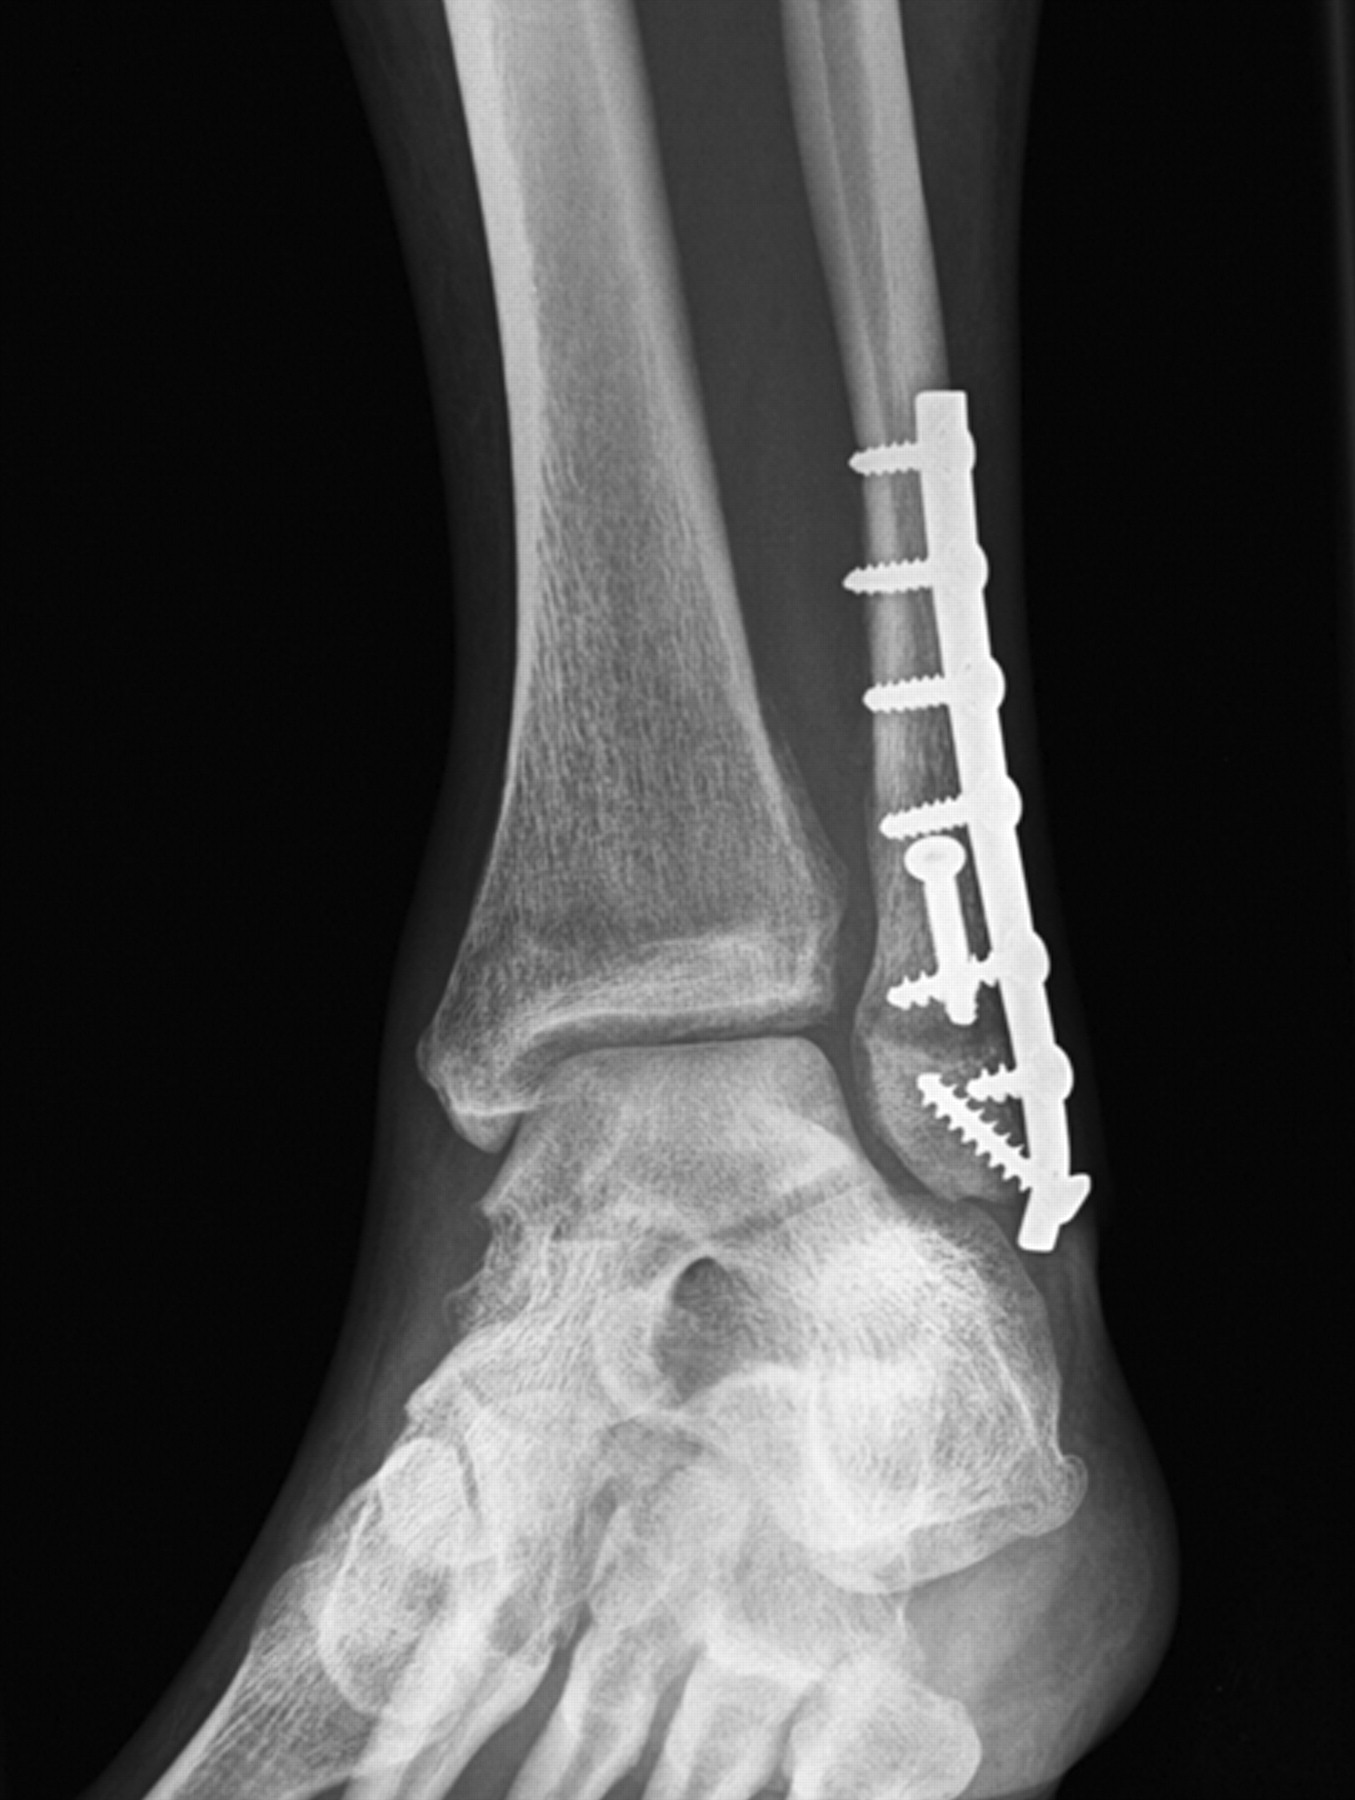 Fig. 2 
          Plain radiographs post-operatively of
a 32-year-old female patient who sustained a Weber B fracture of
the left ankle, with no overlap existing between the tibia and fibula,
showing a) the left ankle, which showed no increase in the distance
between the tibia and fibula or increase of the medial clear space
during intra-operative testing and b) the right ankle, showing that
the condition was present on the right side, which had no history
of trauma, pain or previous surgery.
        